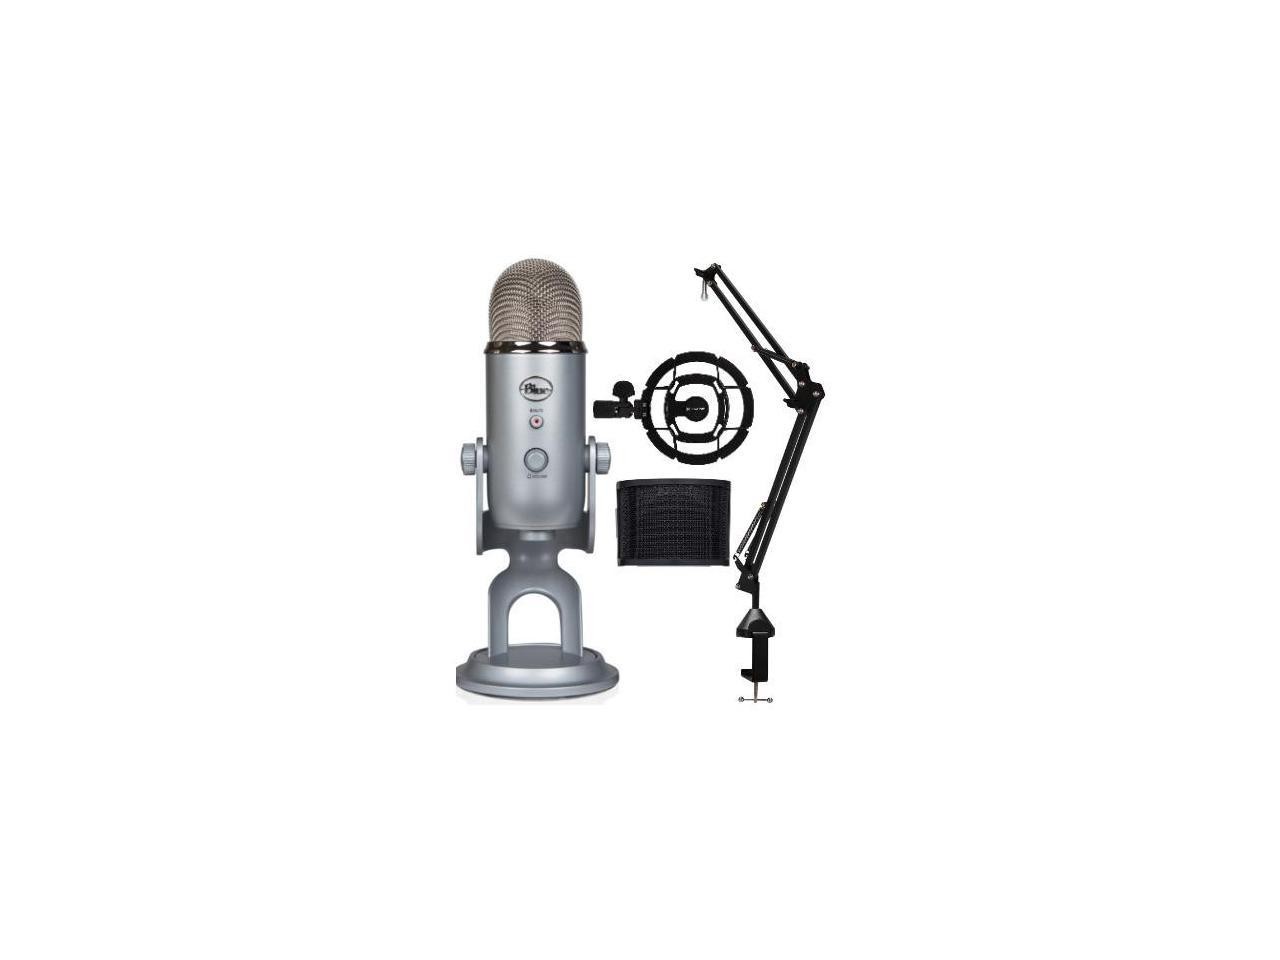 Blue Yeti Microphone (Silver) with Boom Arm Stand, Shock Mount and